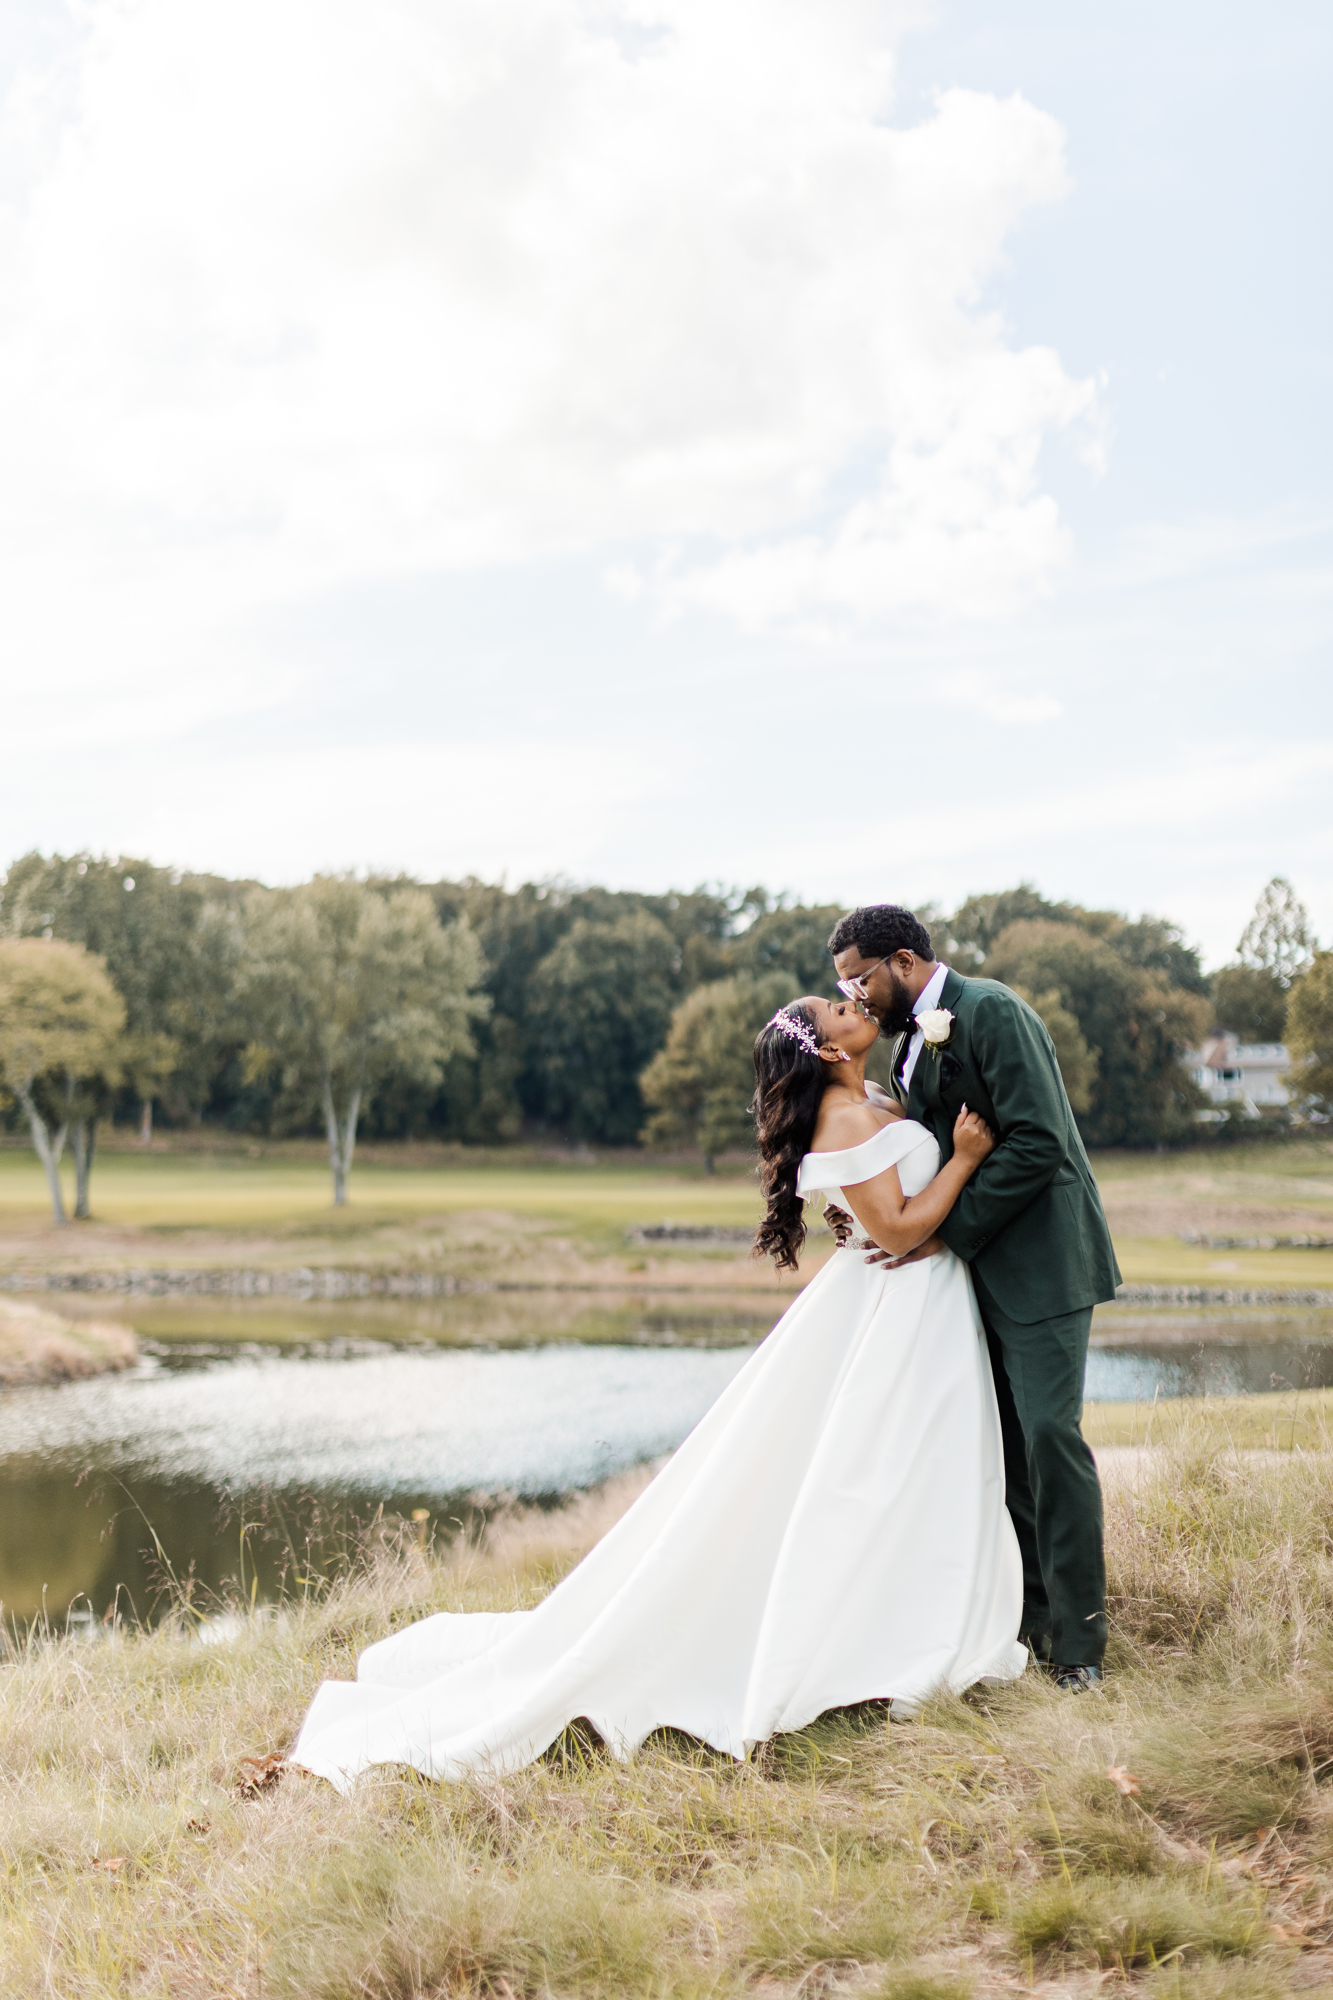 Stylish New Jersey Wedding Photos at Edgewood Country Club in Fall